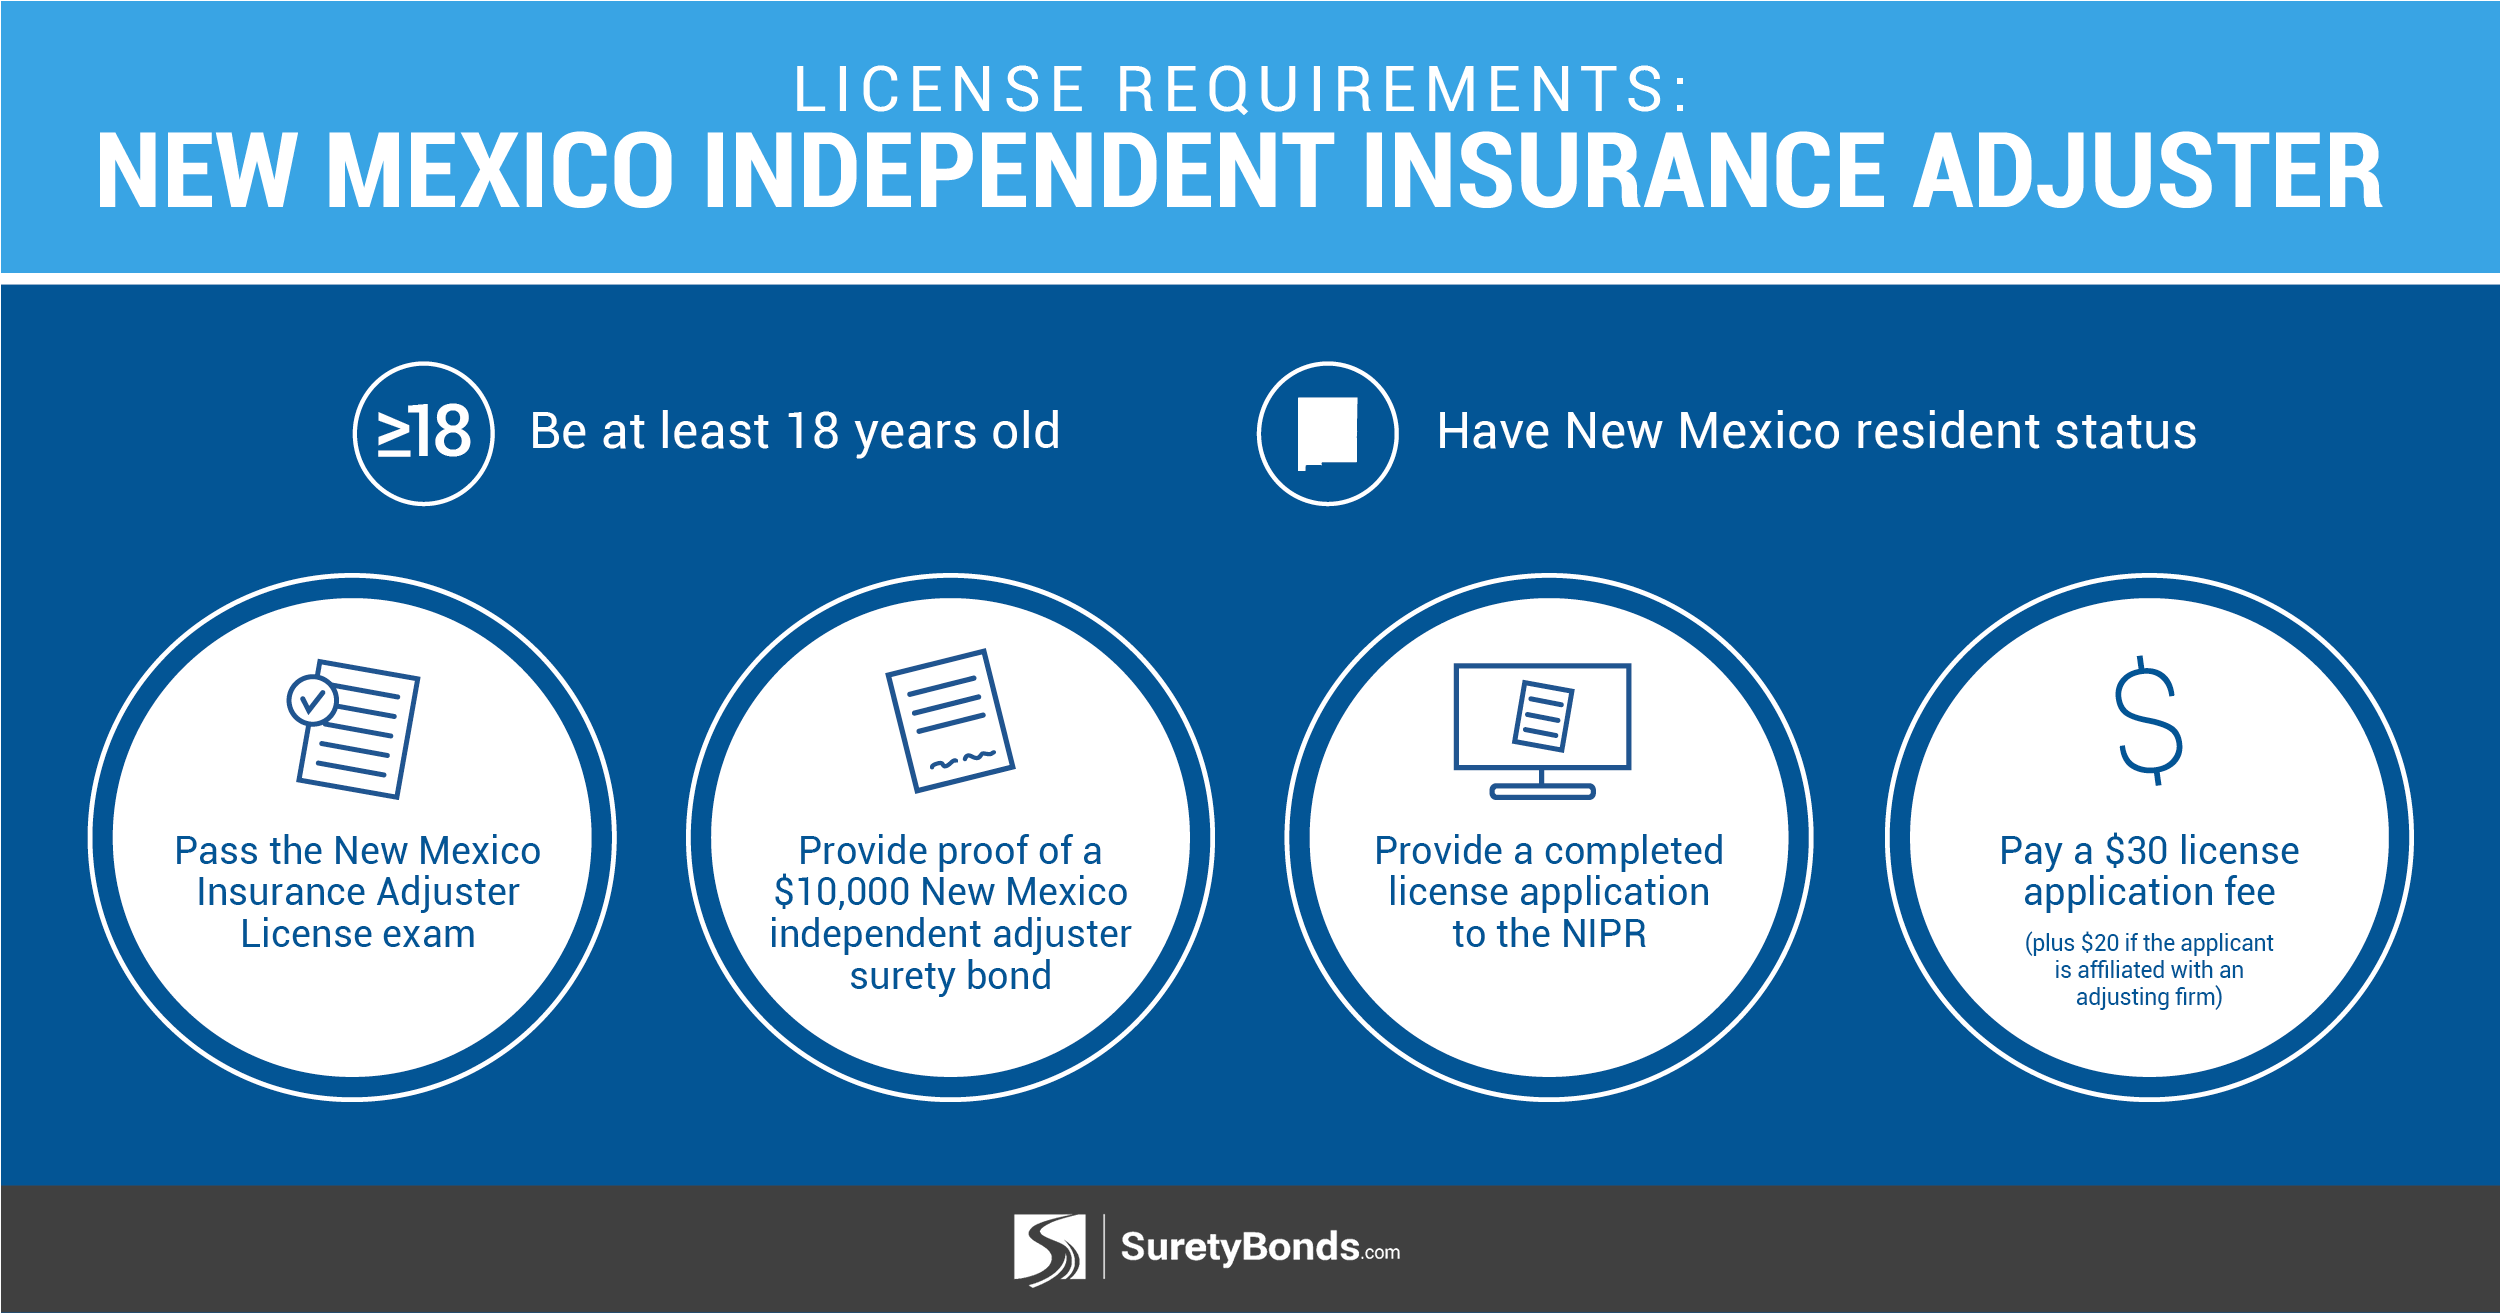 Pass the NM license exam, post a $10,000 surety bond, complete license application, and pay a $30 license fee.